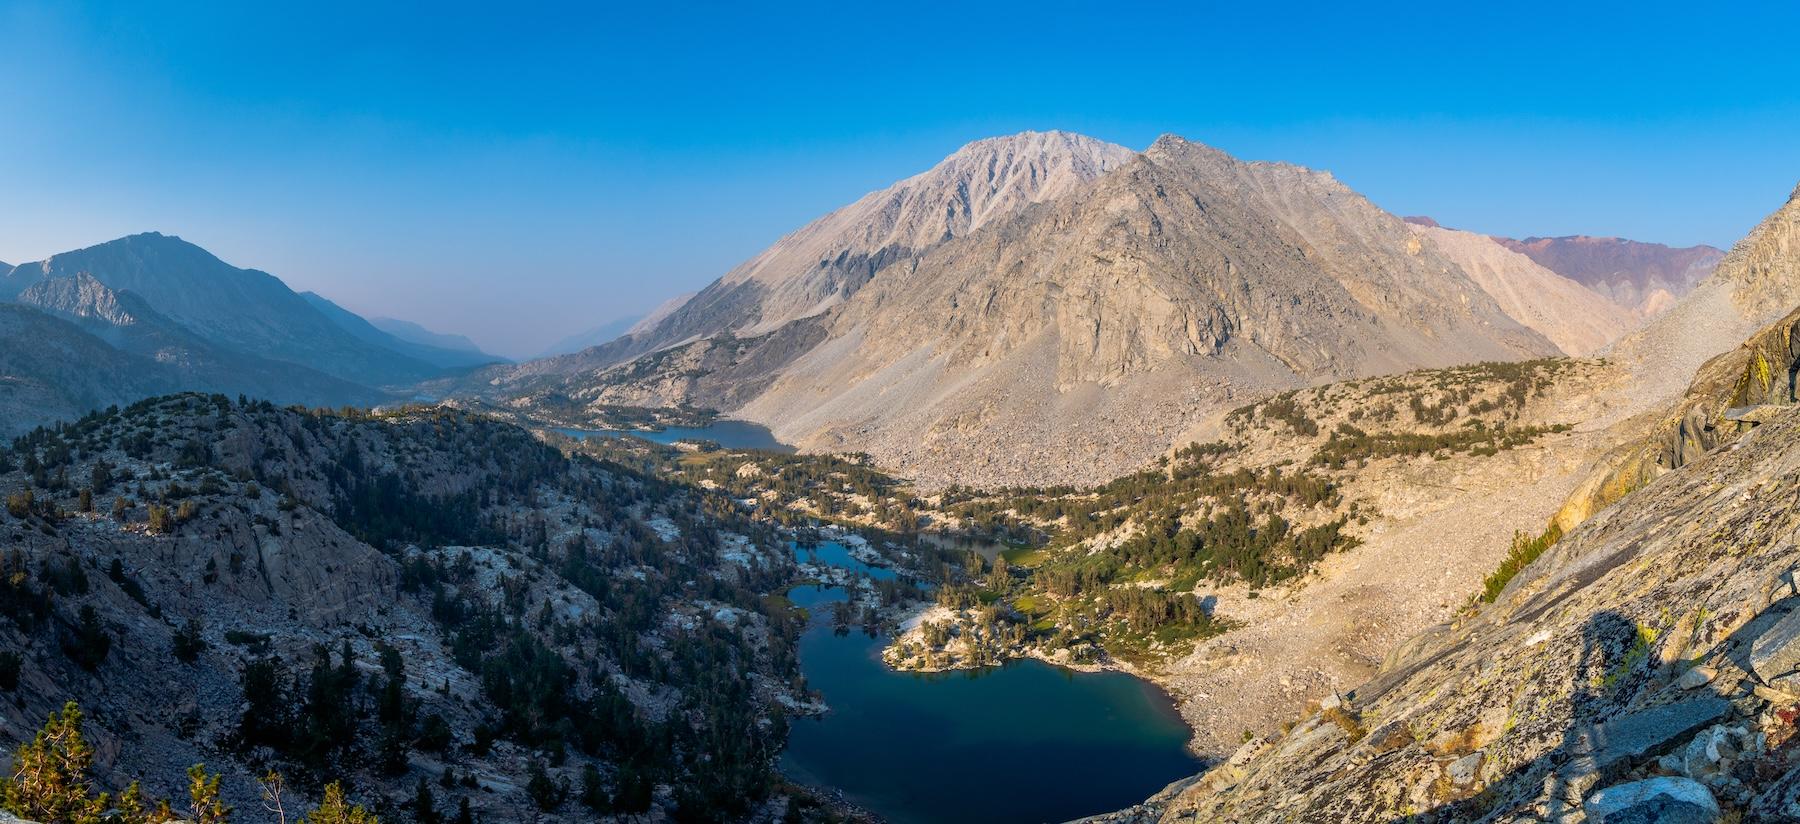 Gem Lake in the Little Lakes Valley of the Sierras